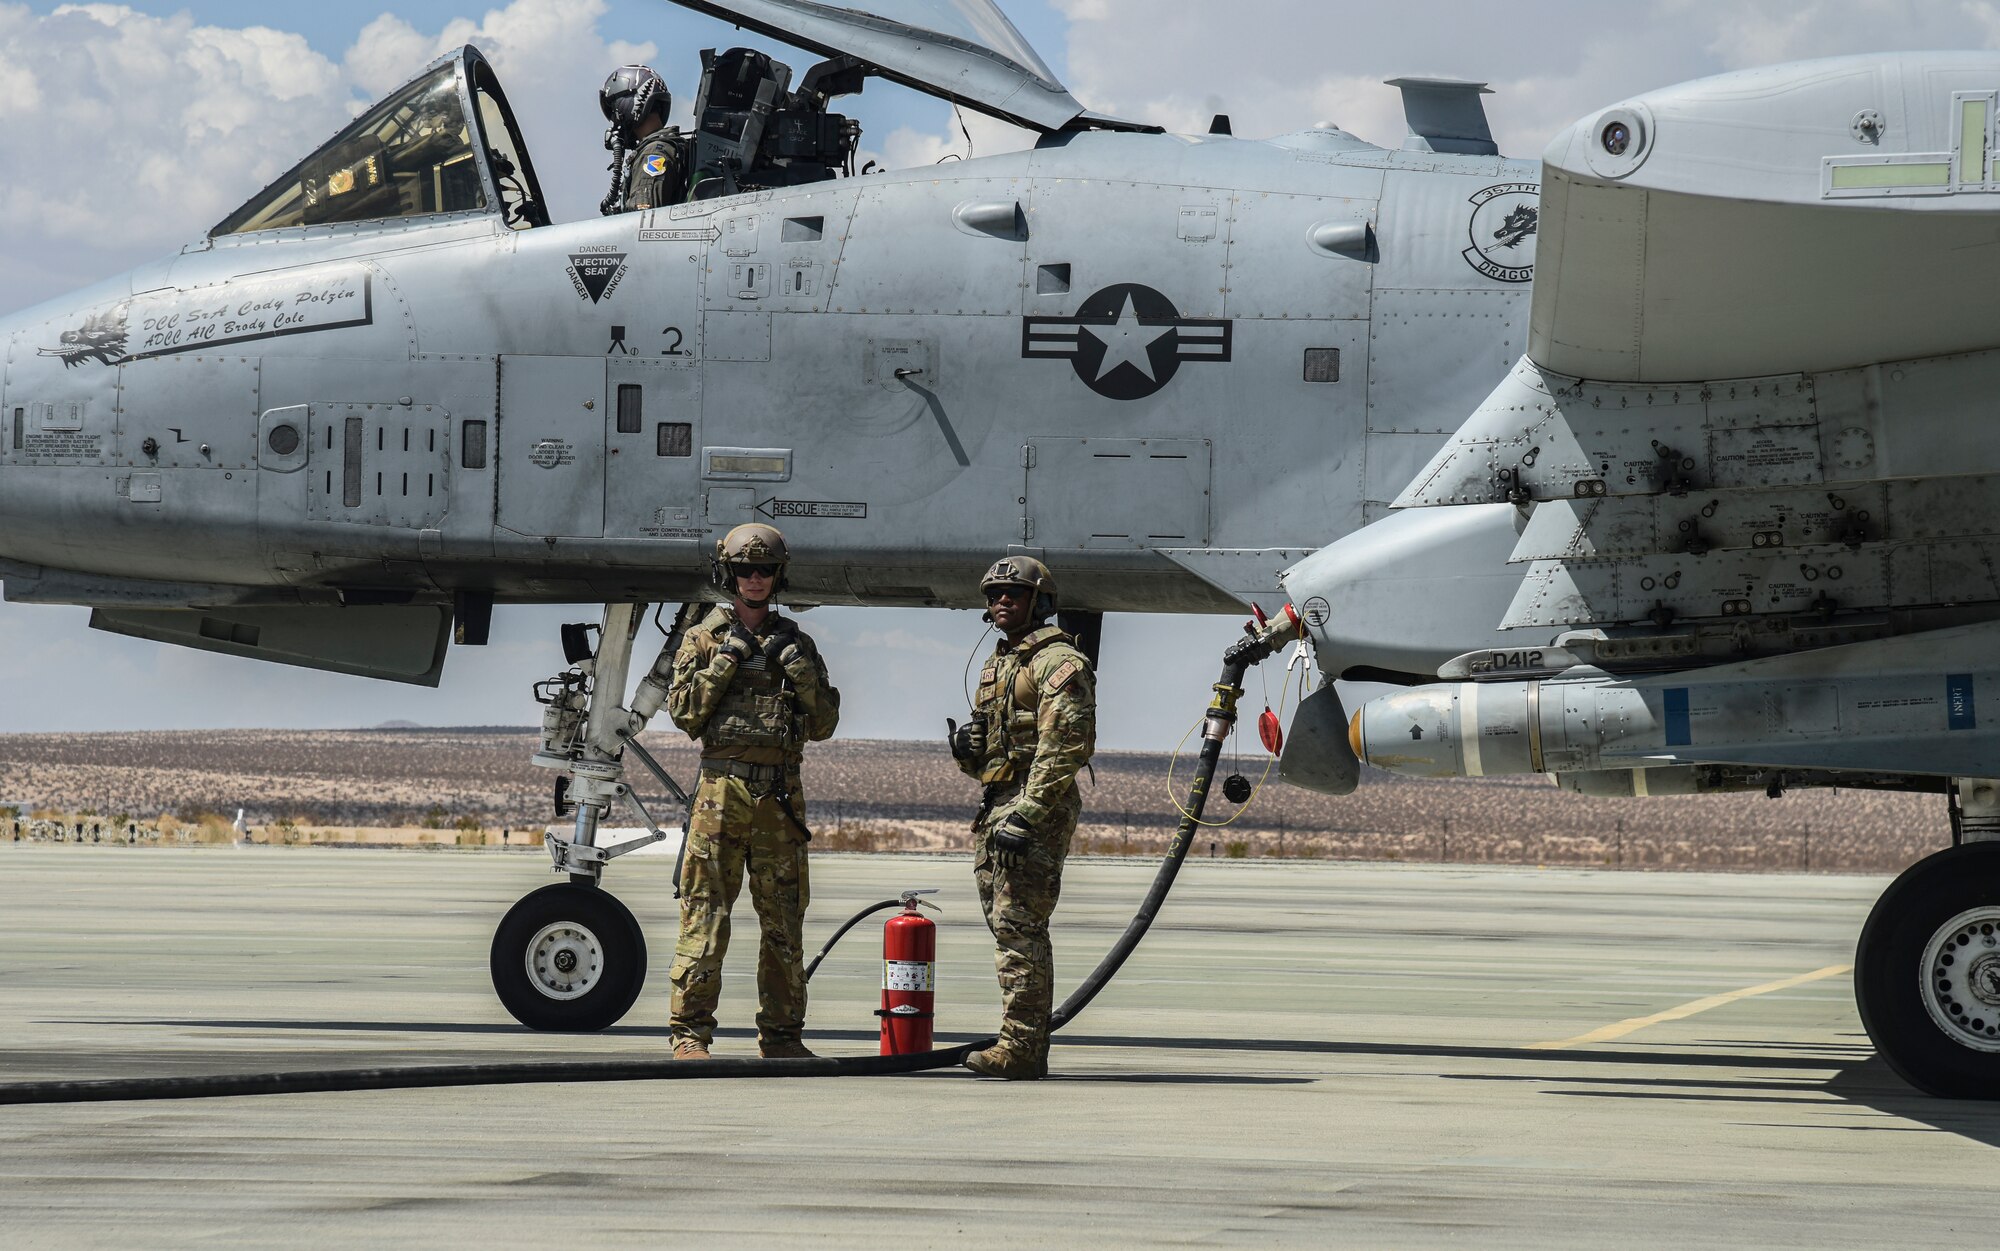 Pictured above are two Airmen standing in front of an aircraft that is refueling.